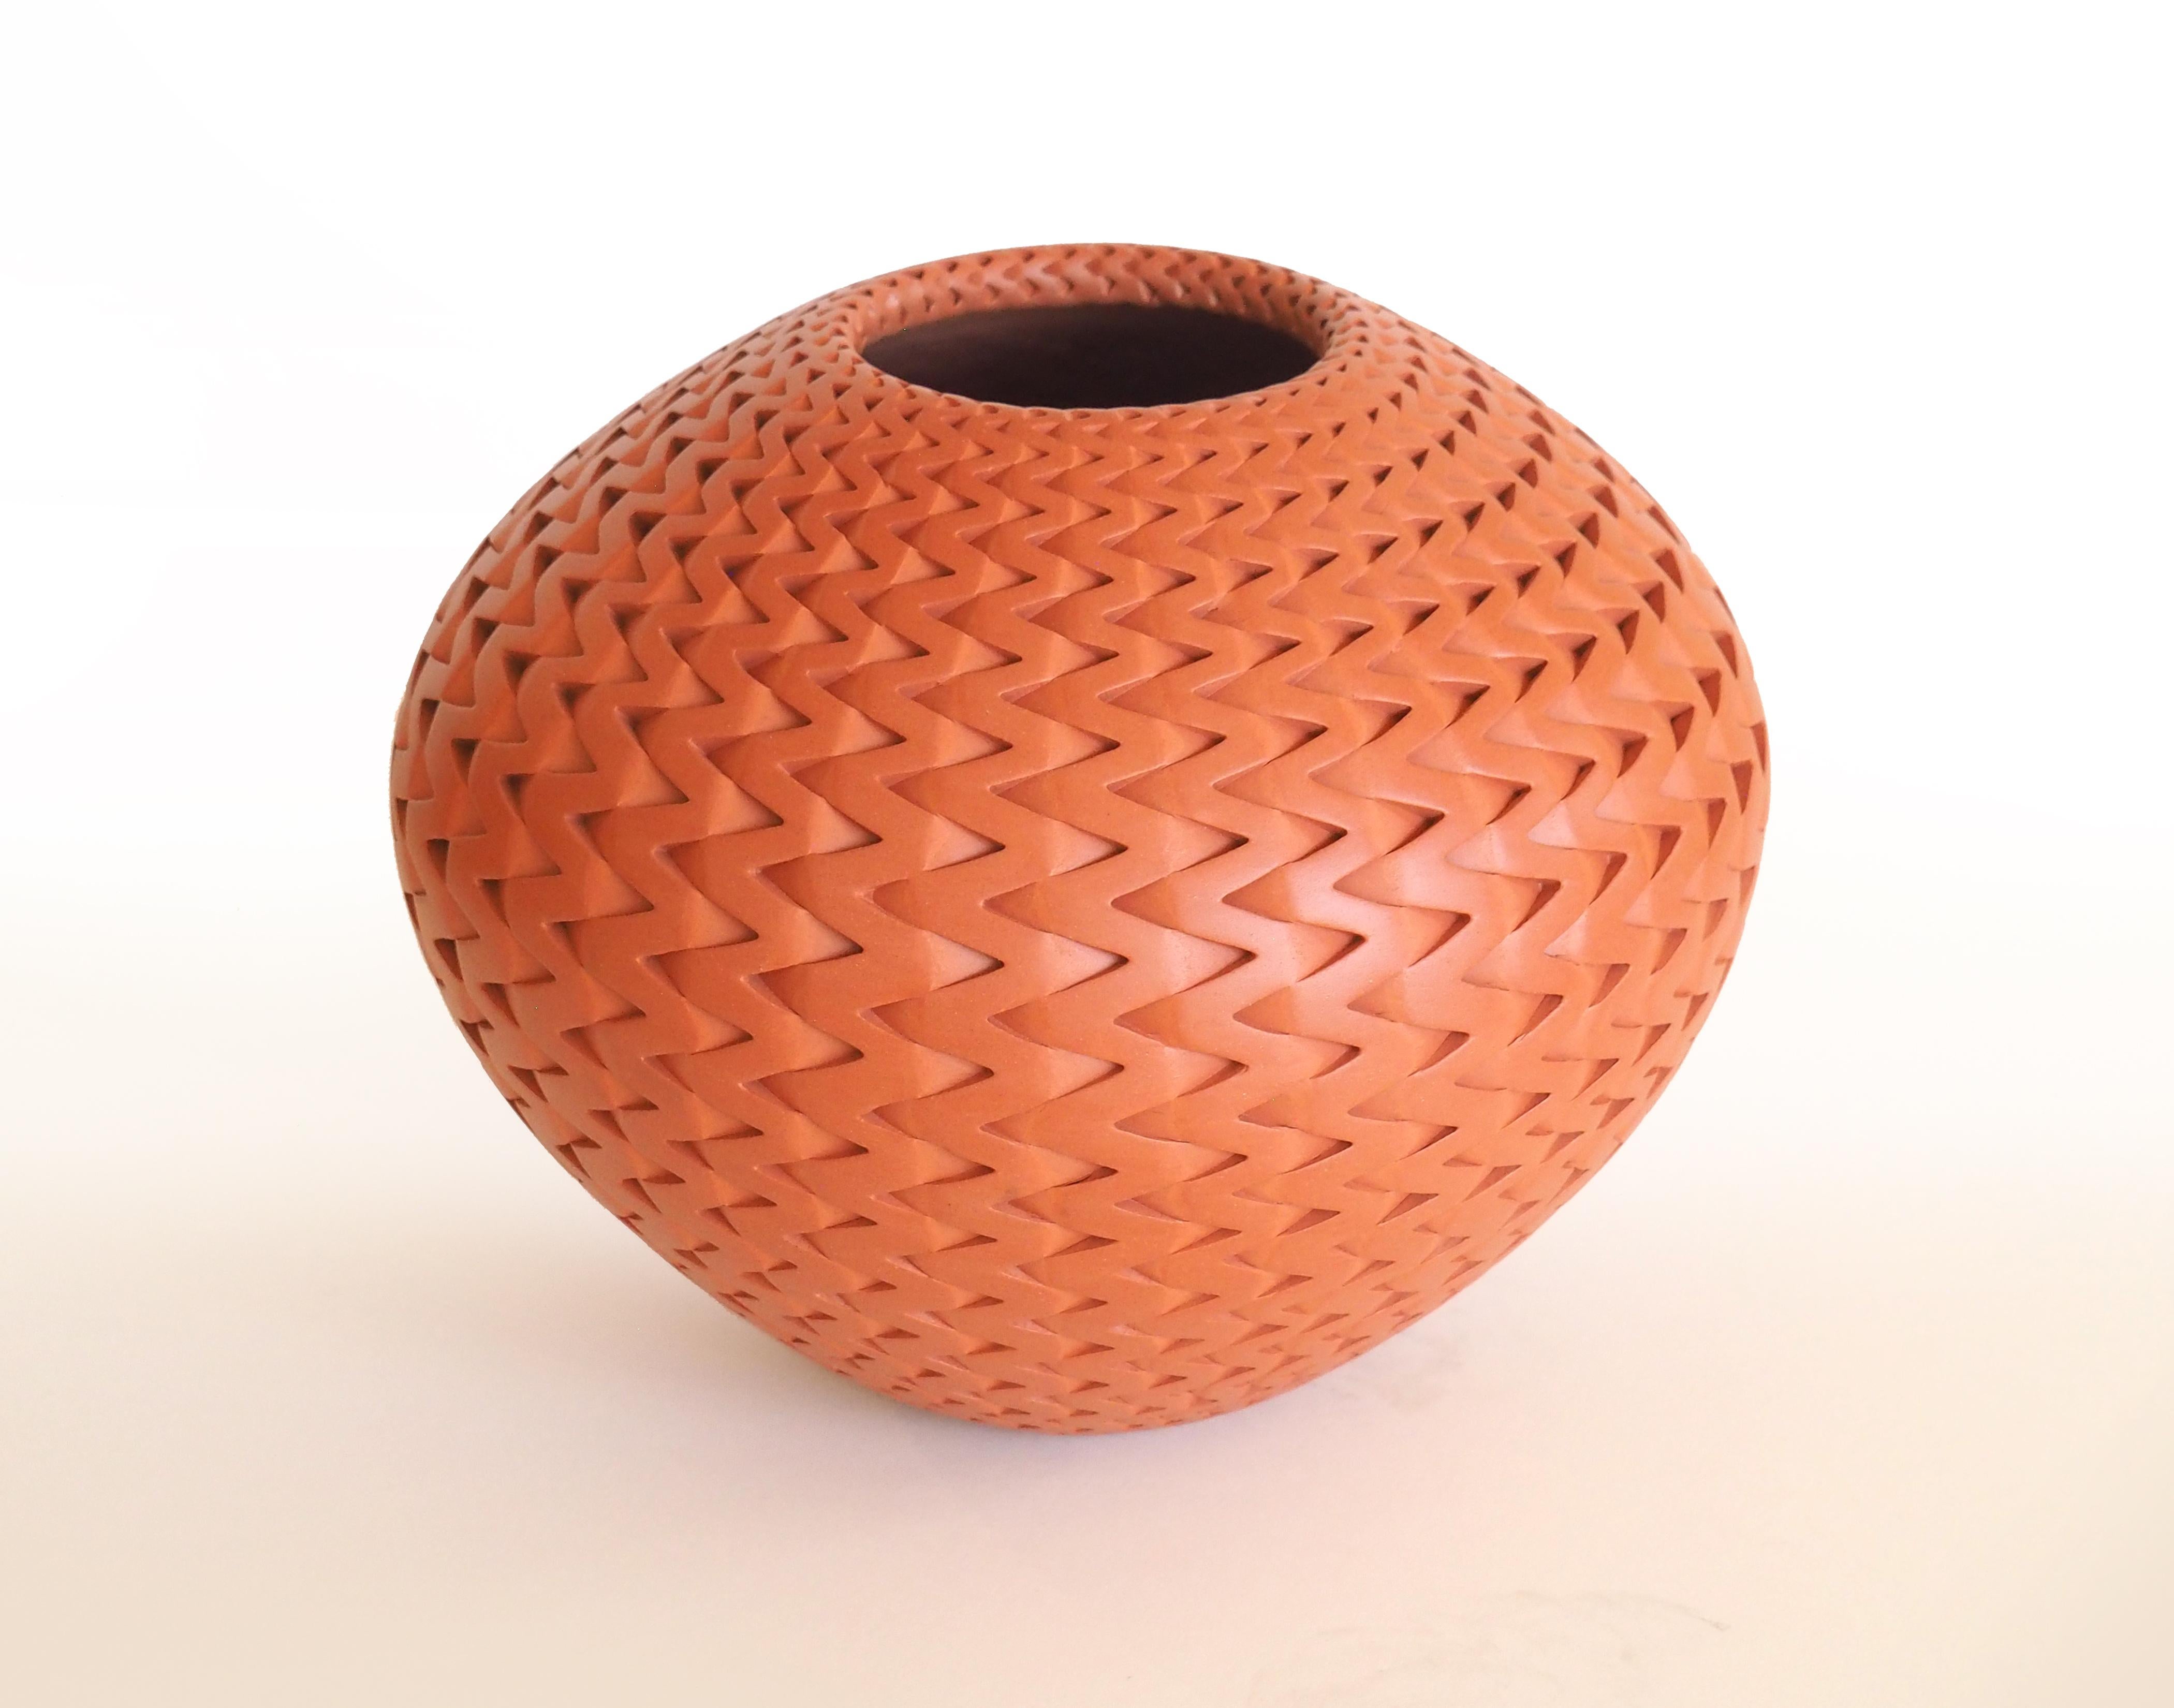 Red Zig Zag (handmade, red, pottery, patterned) - Sculpture by Michael Wisner